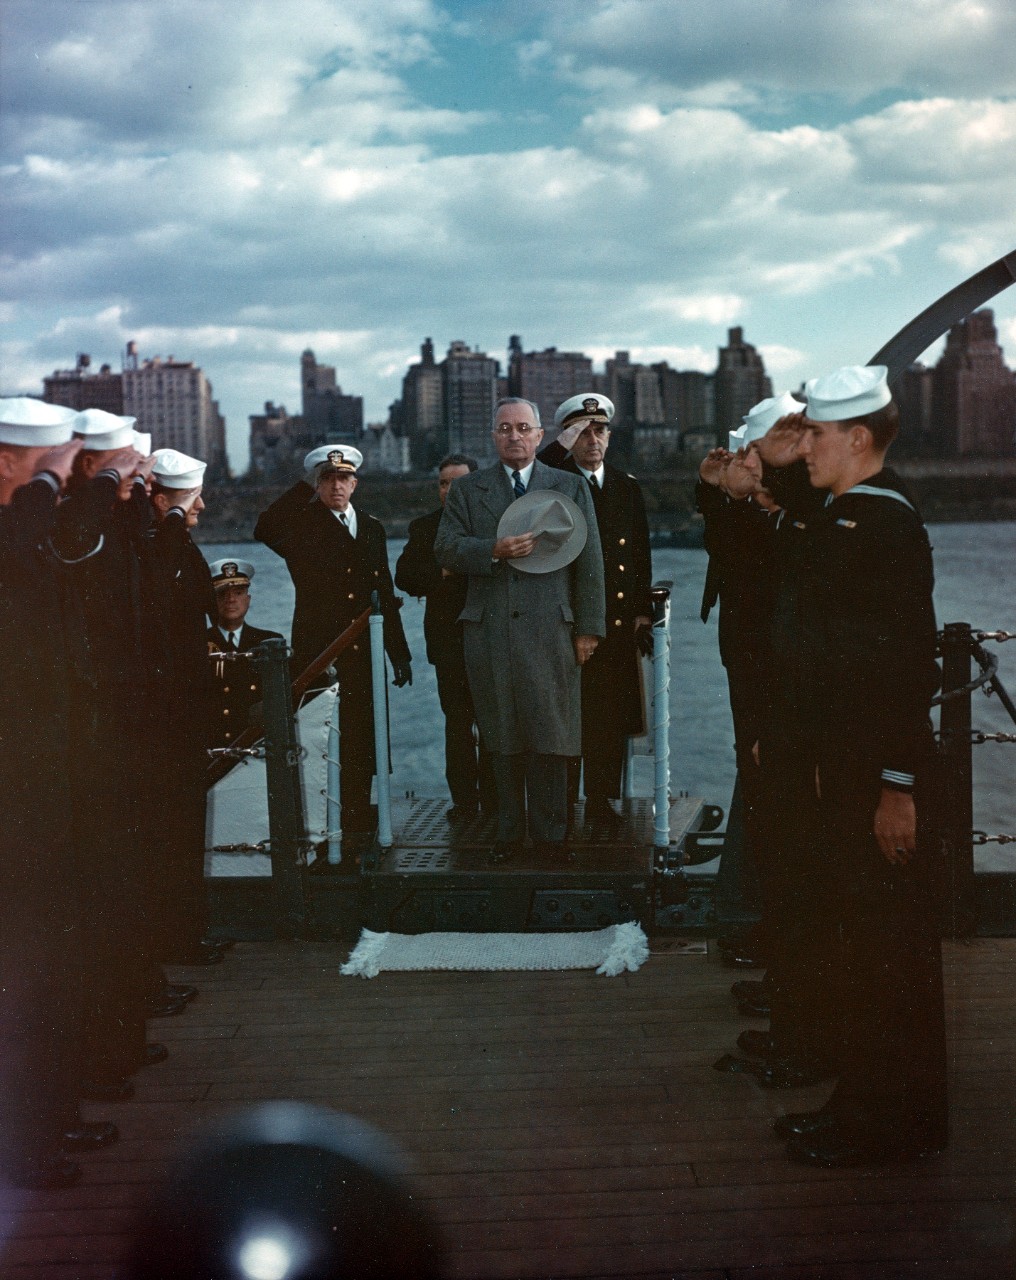 President Harry S. Truman is piped aboard USS Missouri (BB-63), during the Navy Day fleet review in the Hudson River, New York City, 27 October 1945. Fleet Admiral William D. Leahy is just behind the President.